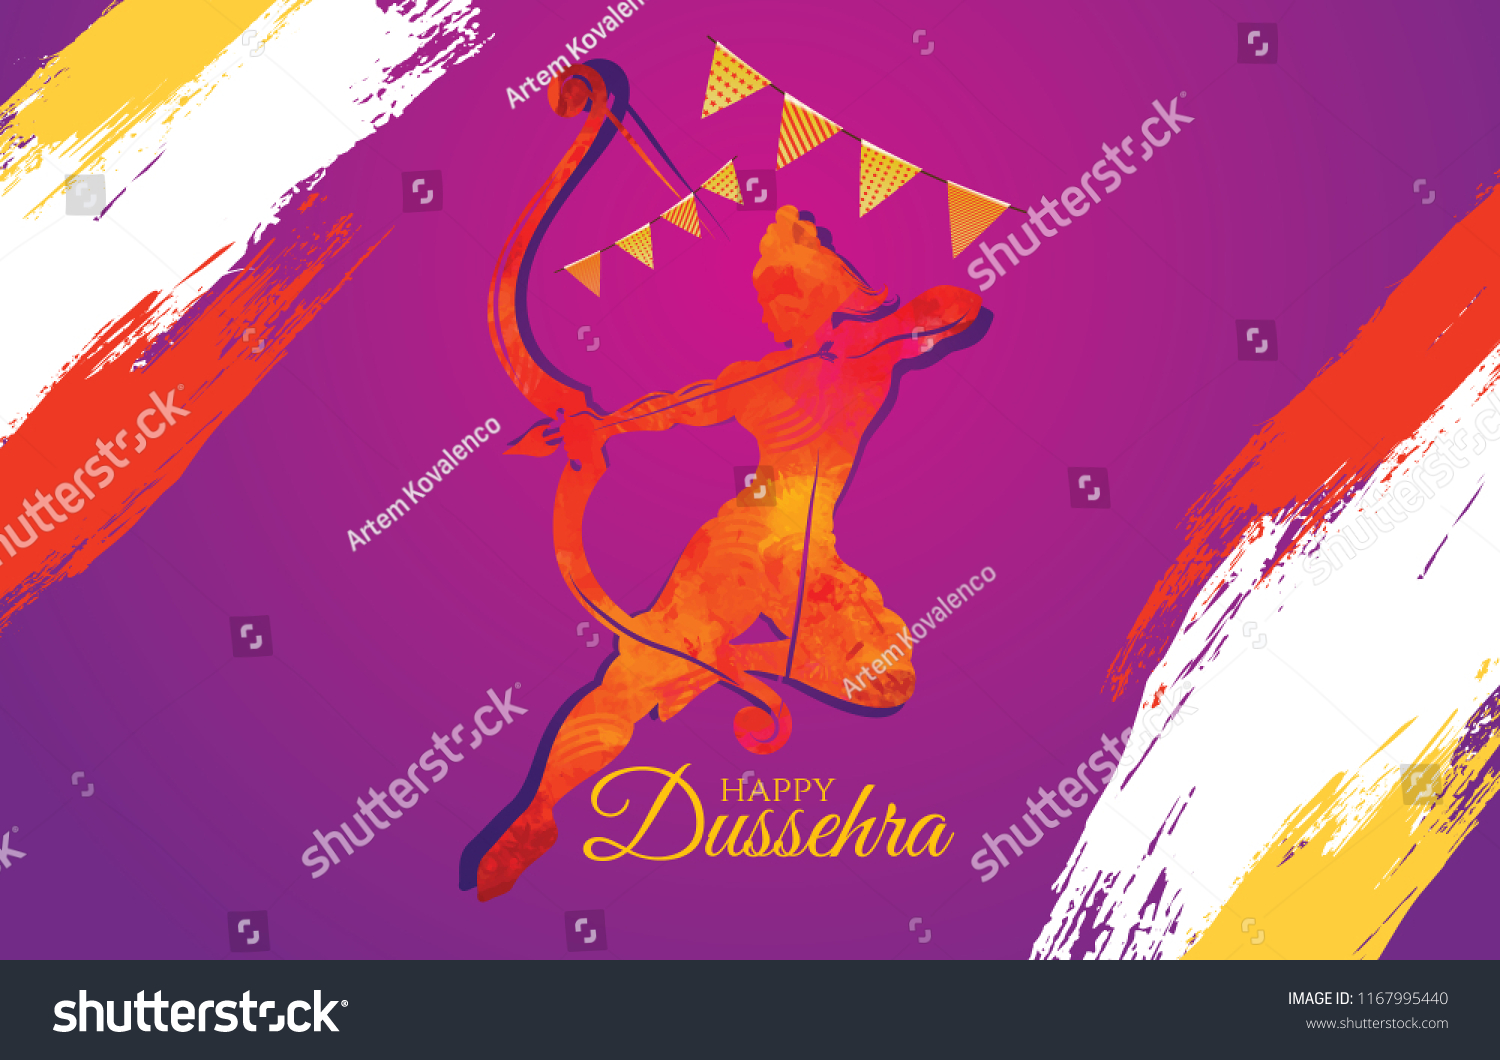 vector illustration indian holiday happy dussehra stock vector royalty free 1167995440 https www shutterstock com image vector vector illustration indian holiday happy dussehra 1167995440